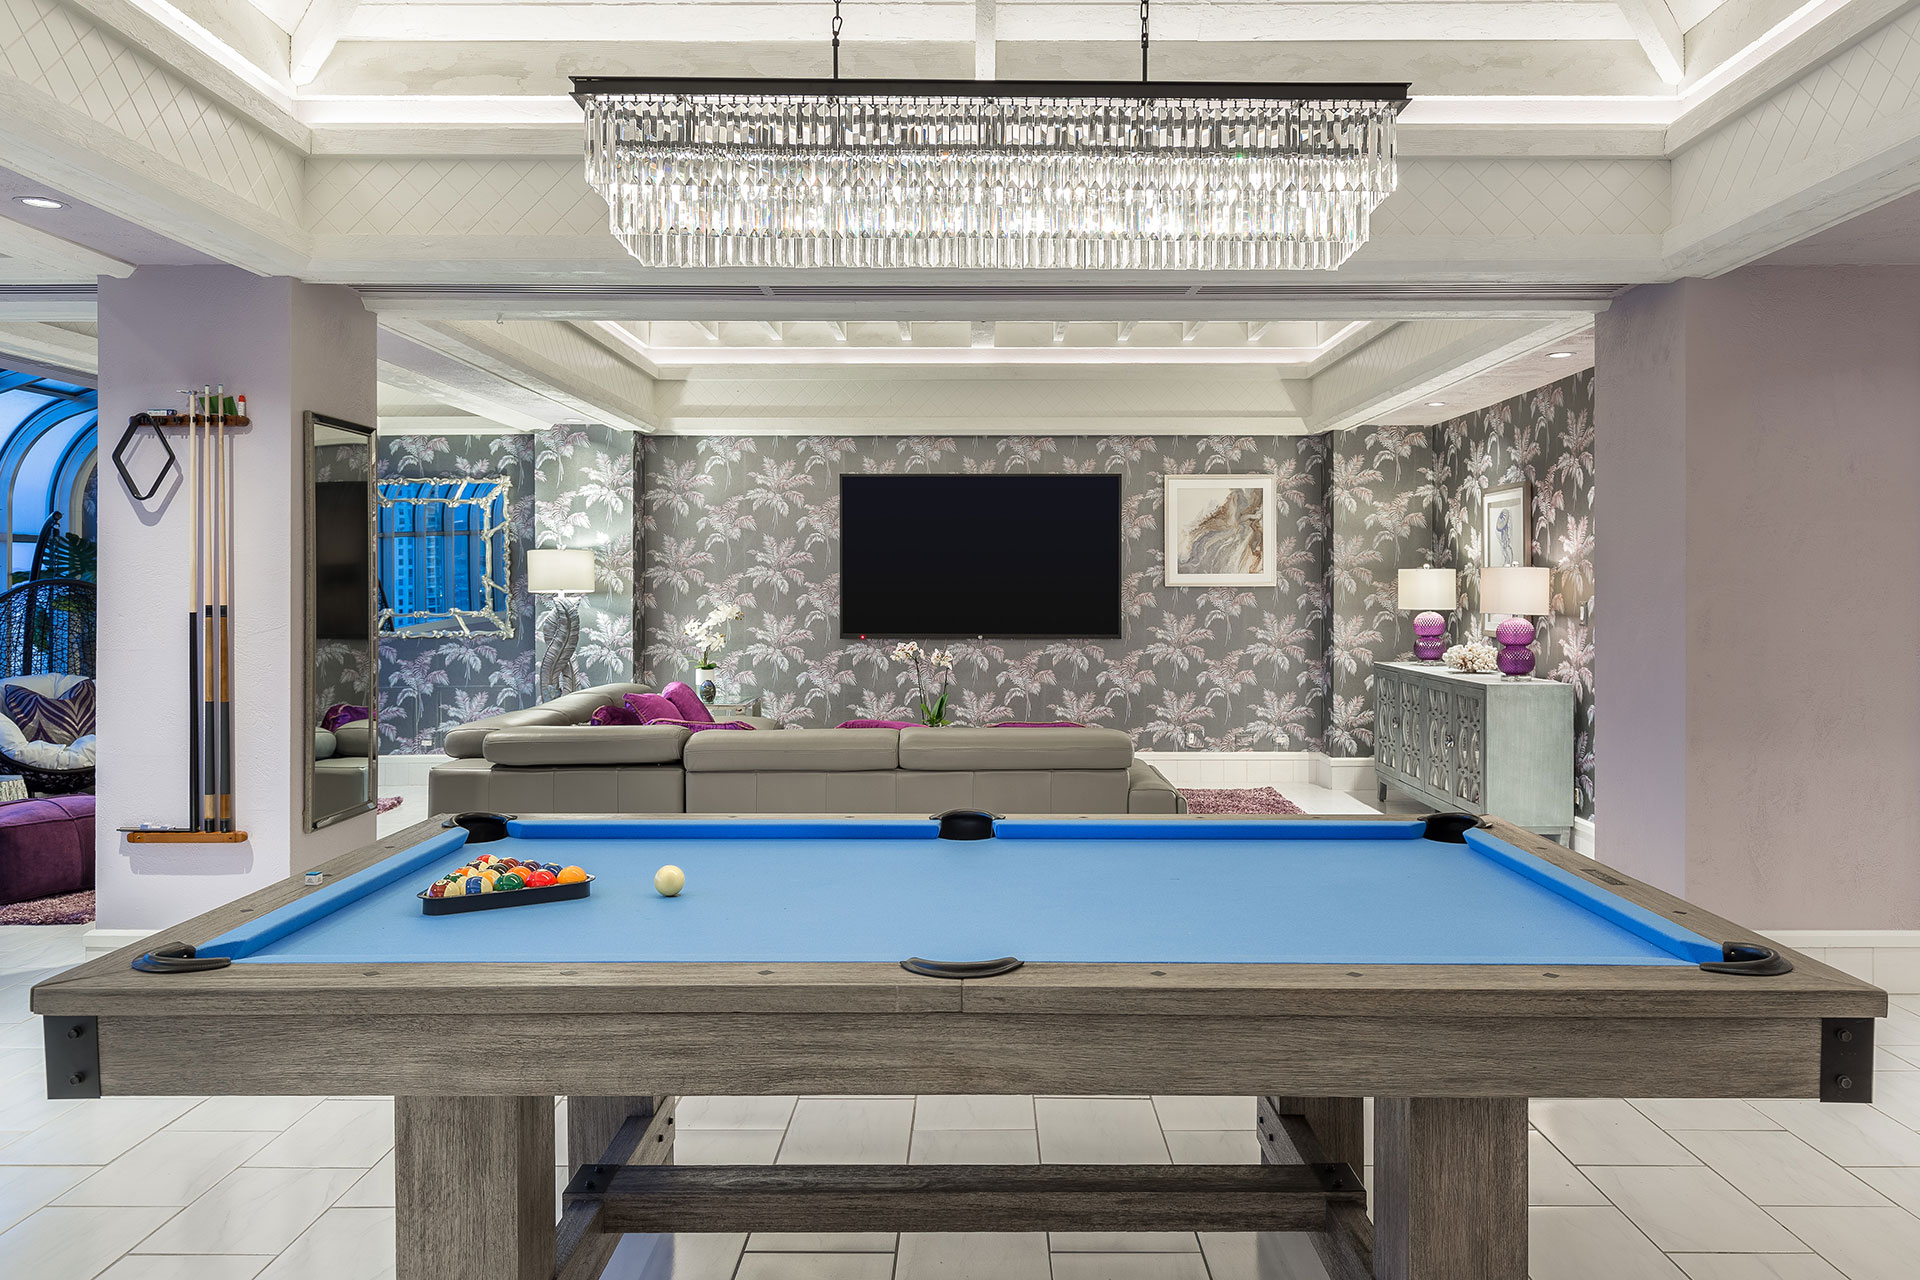 A hotel room with a blue-surfaced pool table in the foreground and a living room with flat-panel TV on silver, patterned wallpaper and a crystal chandelier above.